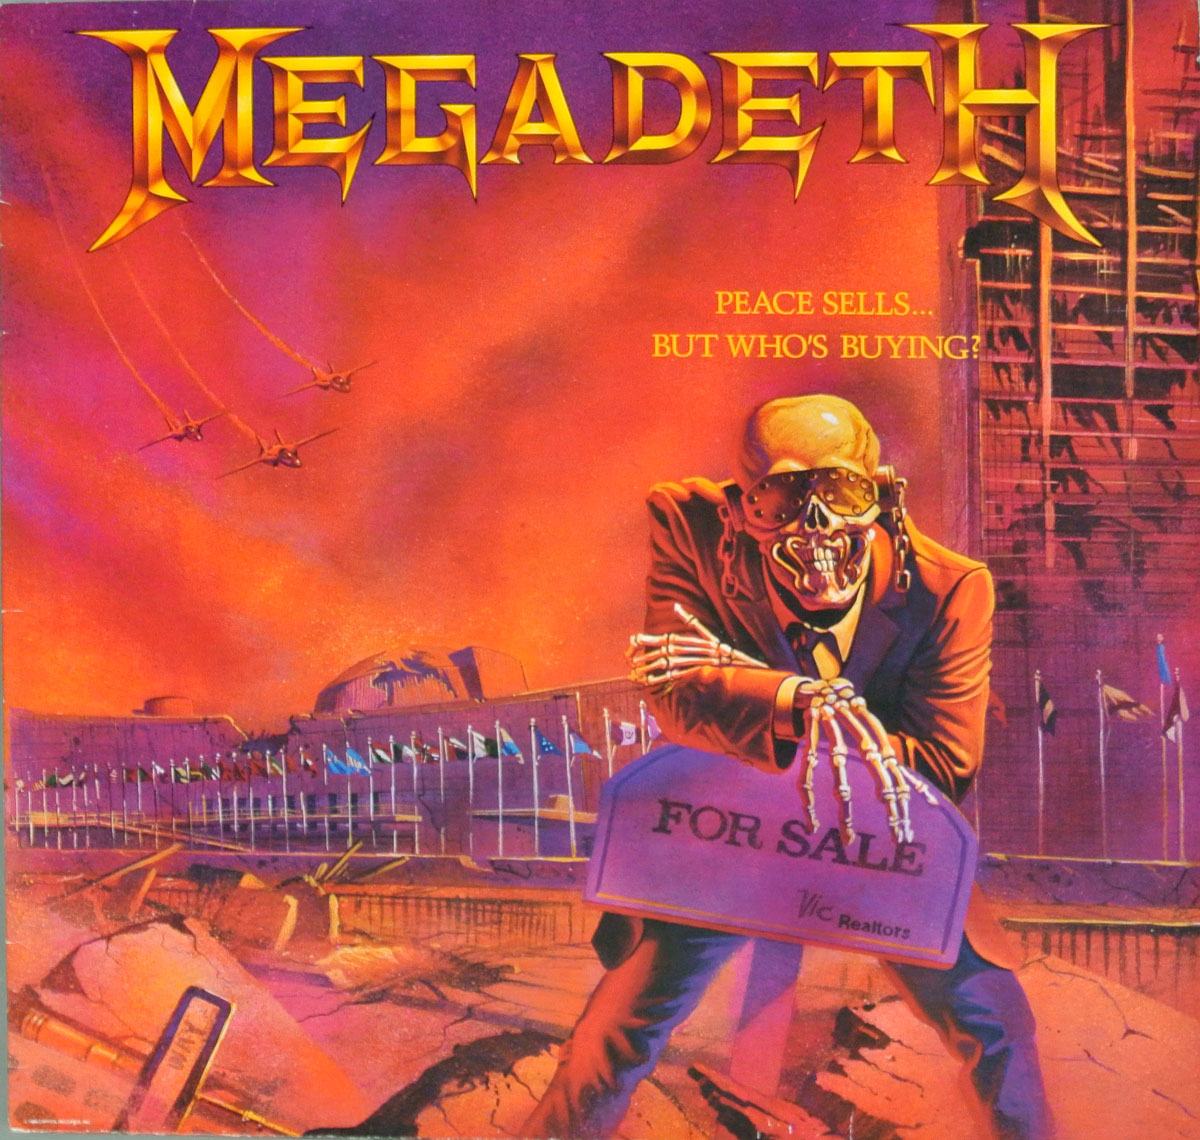 Album Front Cover of MEGADETH PEACE SELLS, BUT WHO'S BUYING?